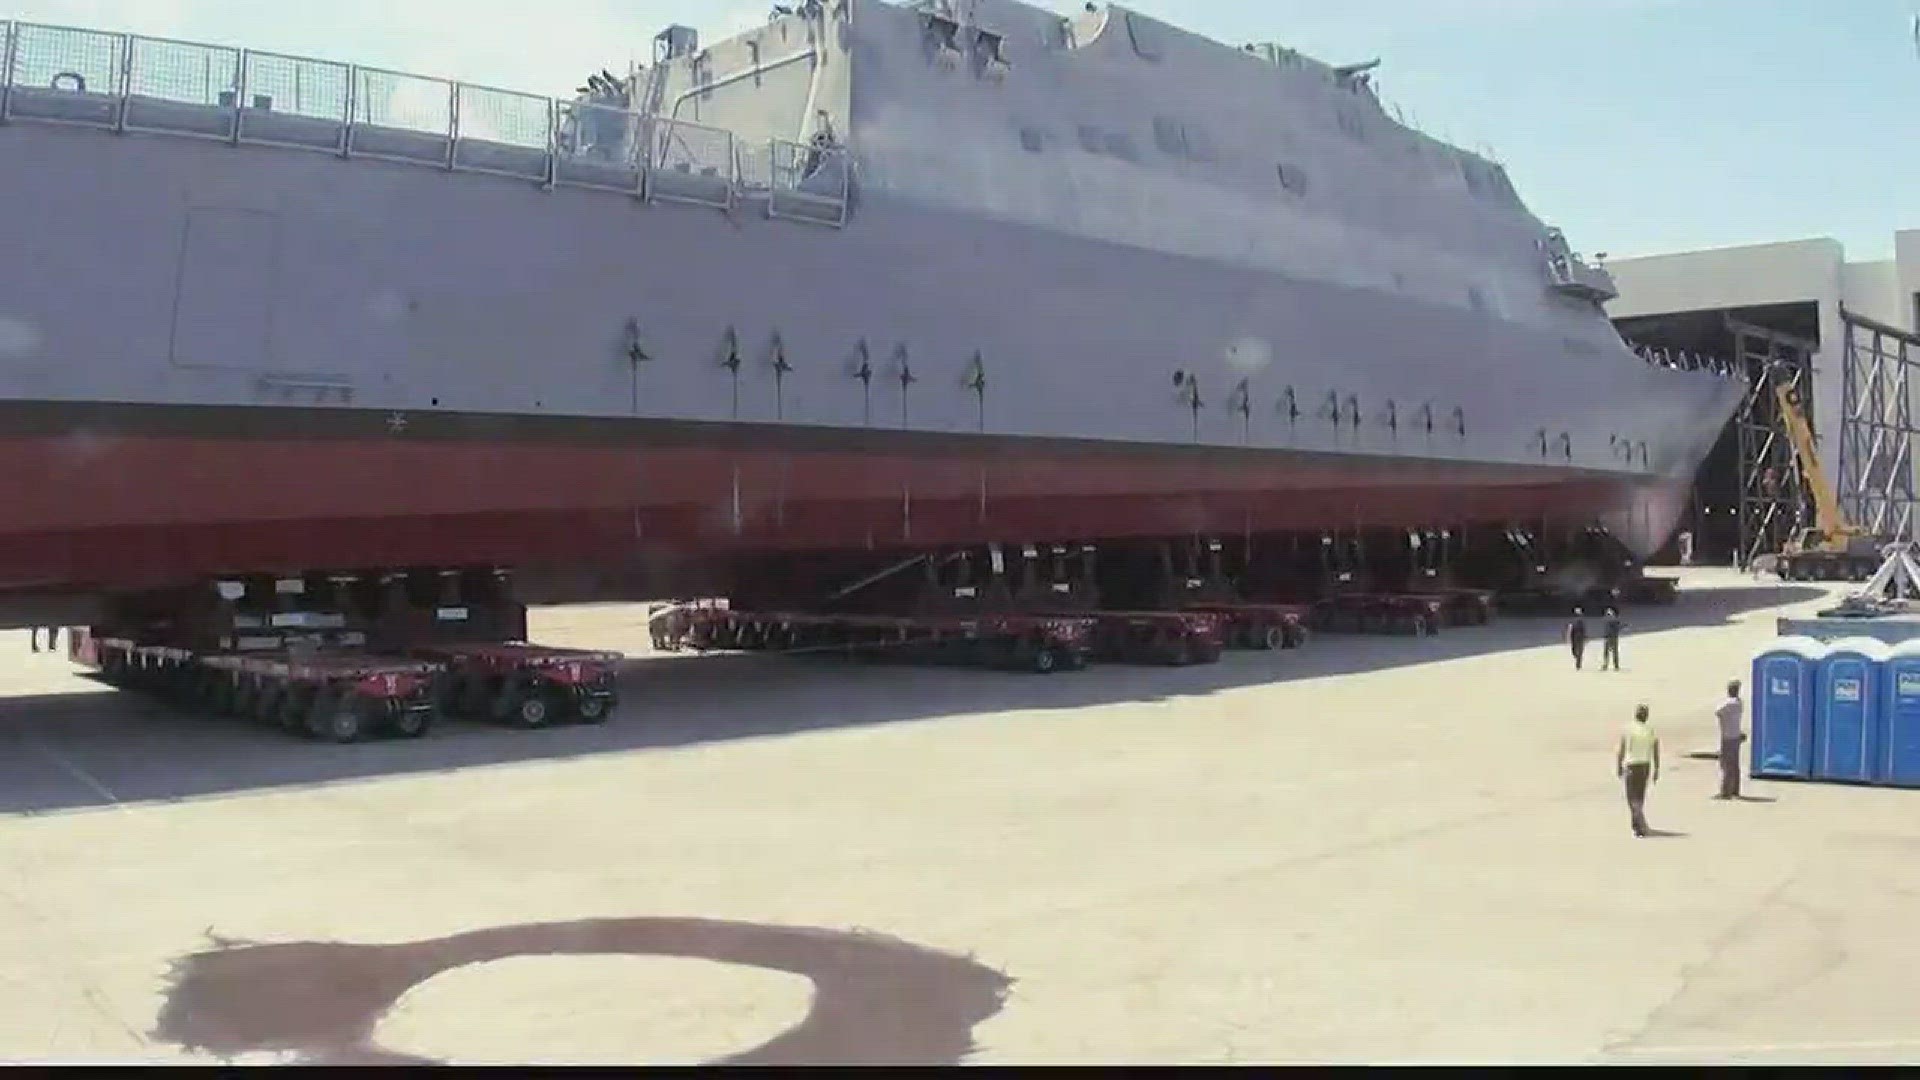 It took six hours to move the future USS Billings on 18 self-propelled transporters